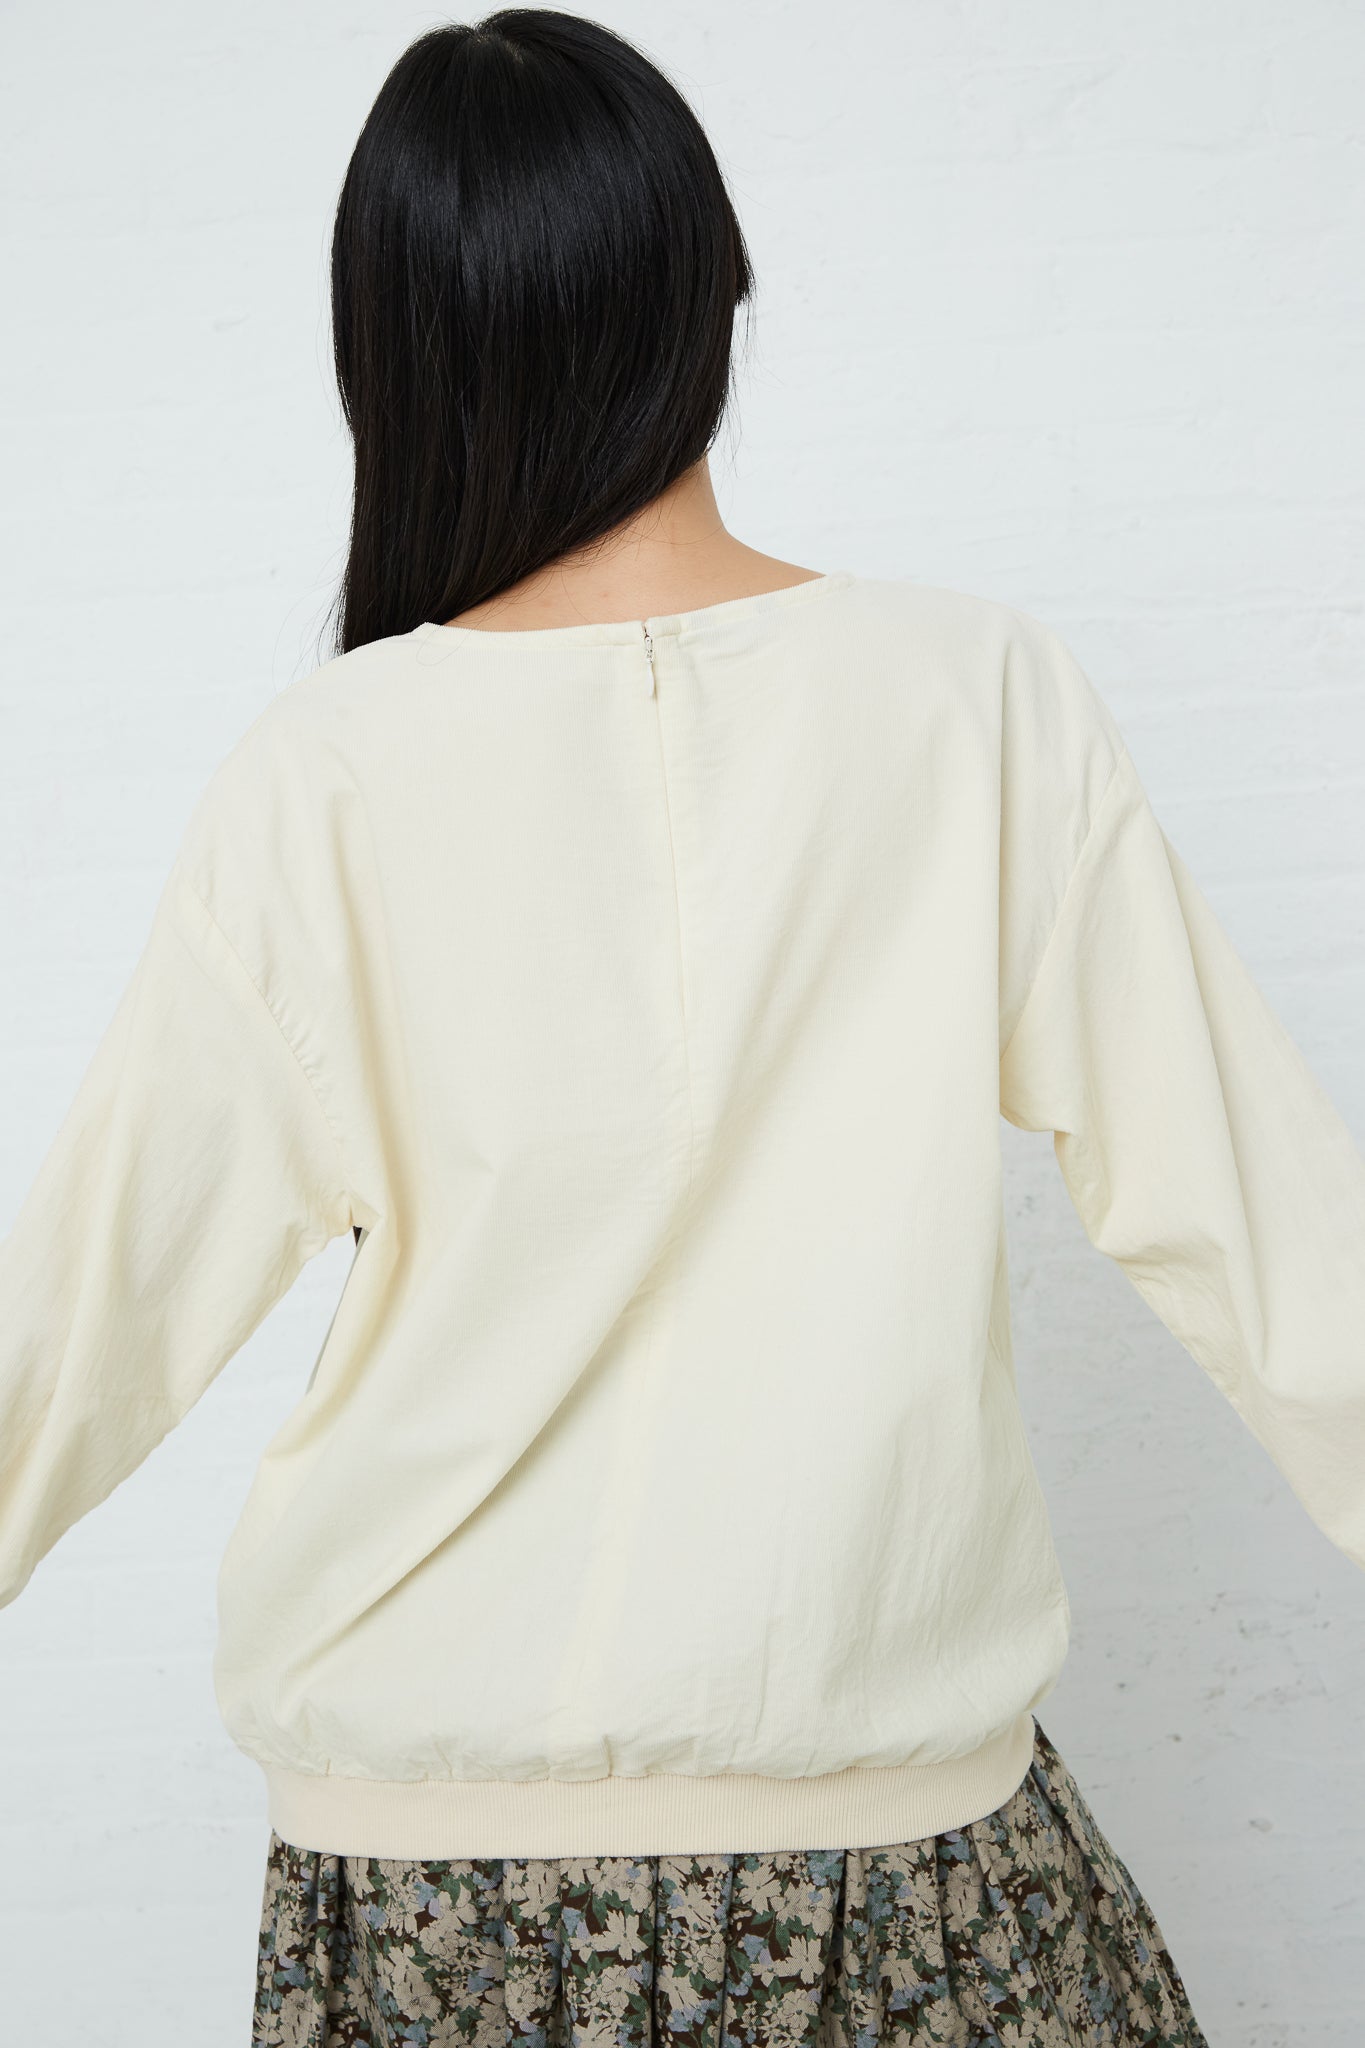 The back of a woman wearing an Ichi Cotton Pullover in Ivory and floral skirt.